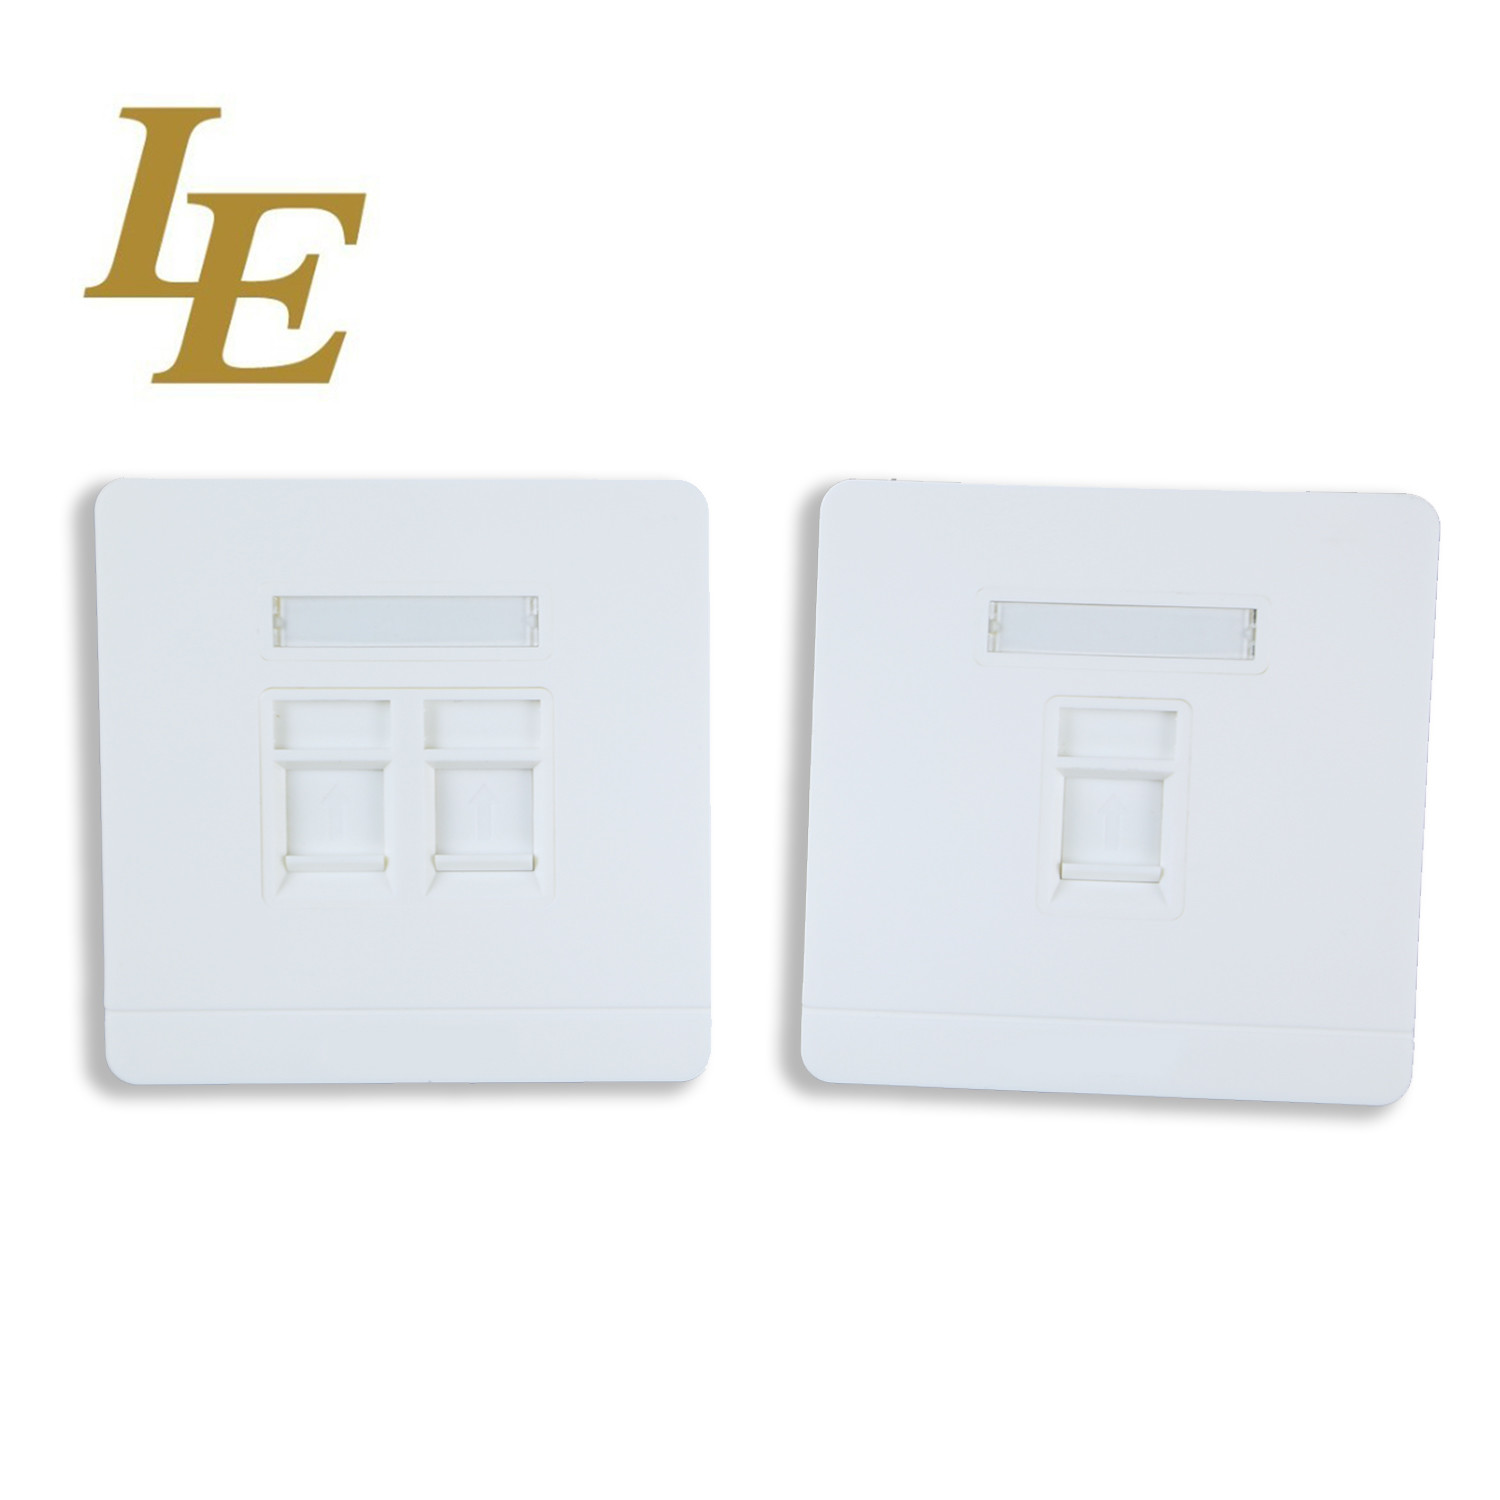 Buy Sgs Single Double Port Rj45 Wall Network Faceplate Socket Oem / Odm at wholesale prices